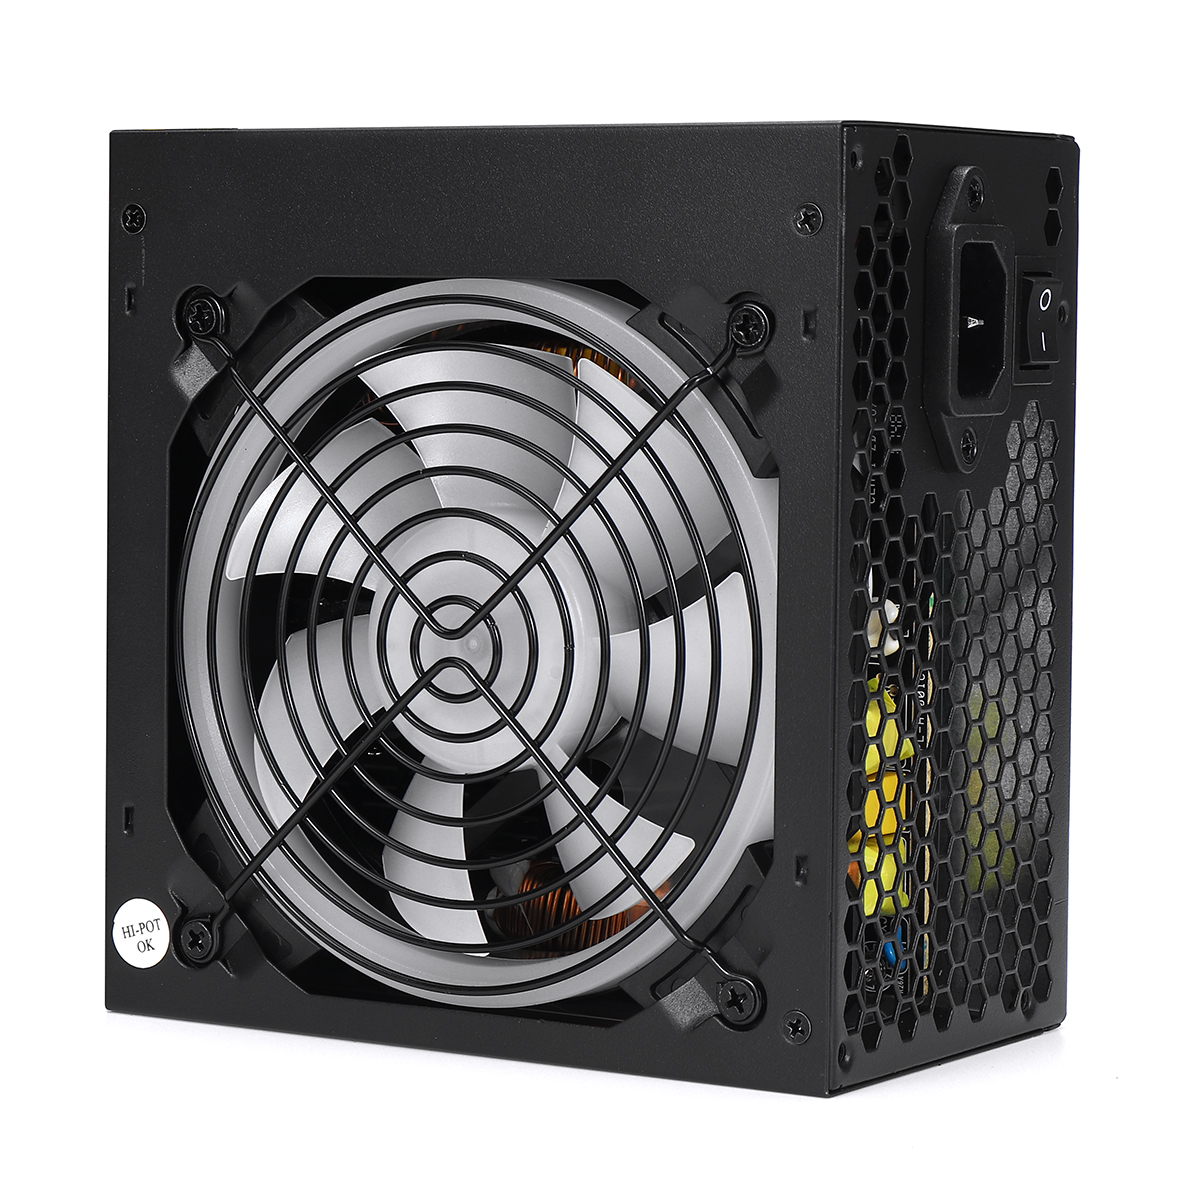 Find 1200W Active PFC PC Power Supply Desktop Computer ATX Power Supply Non-Modular 12V 2.31 LED Fan 220V for Sale on Gipsybee.com with cryptocurrencies